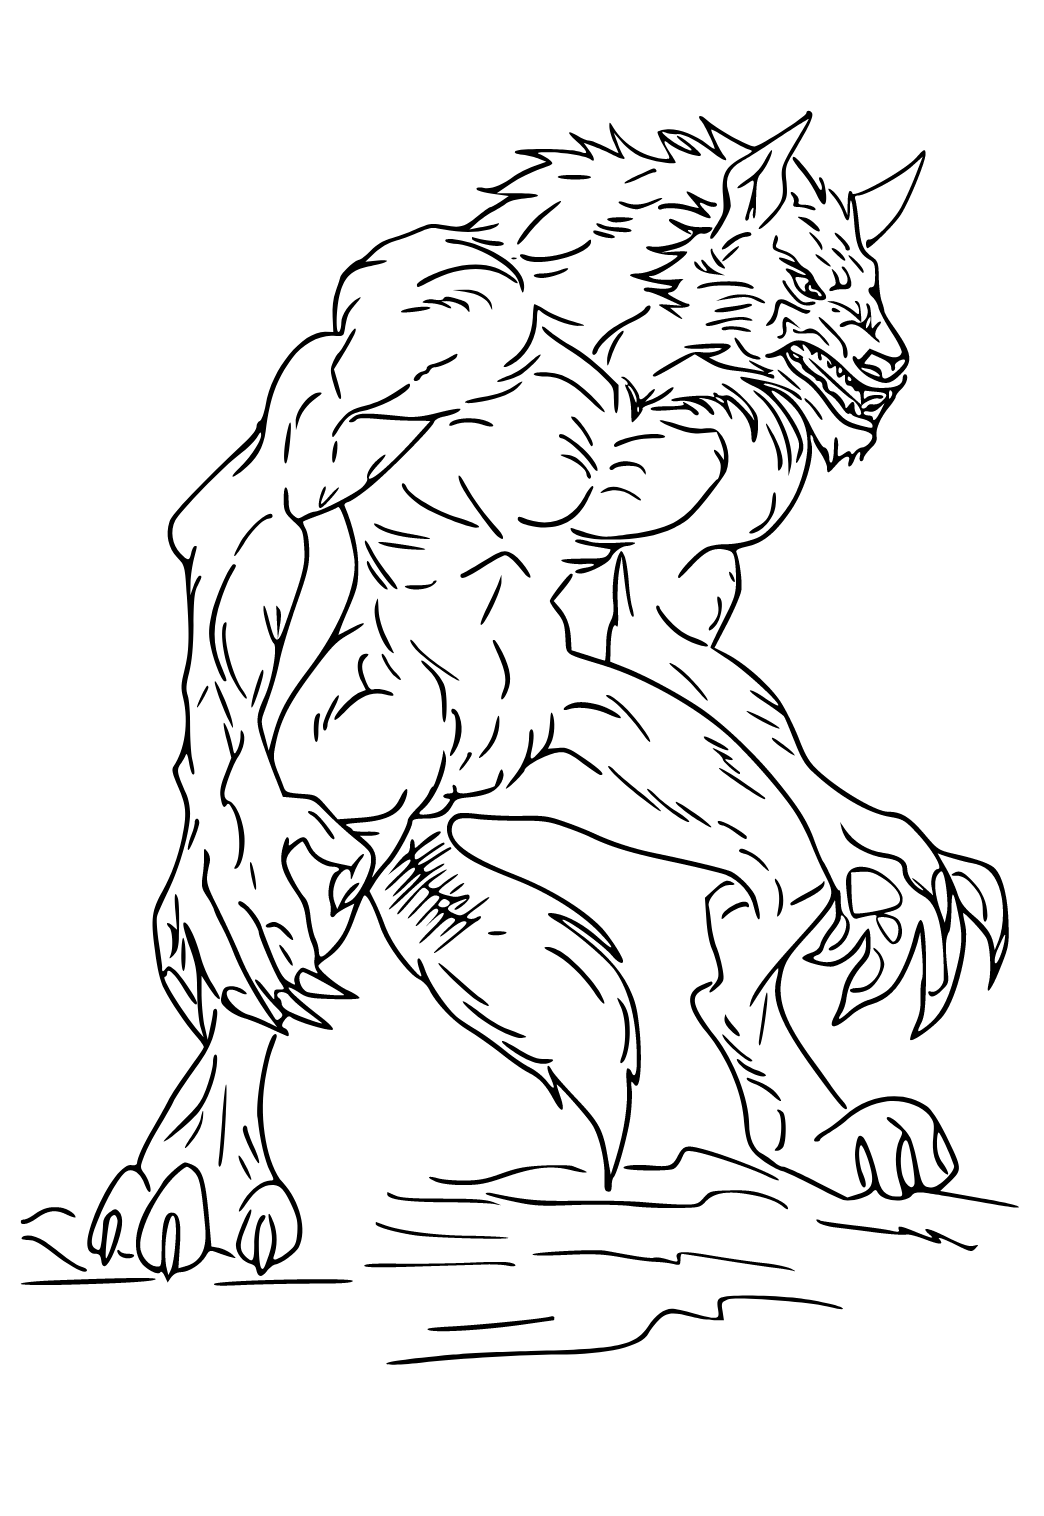 Free printable werewolf monster coloring page for adults and kids